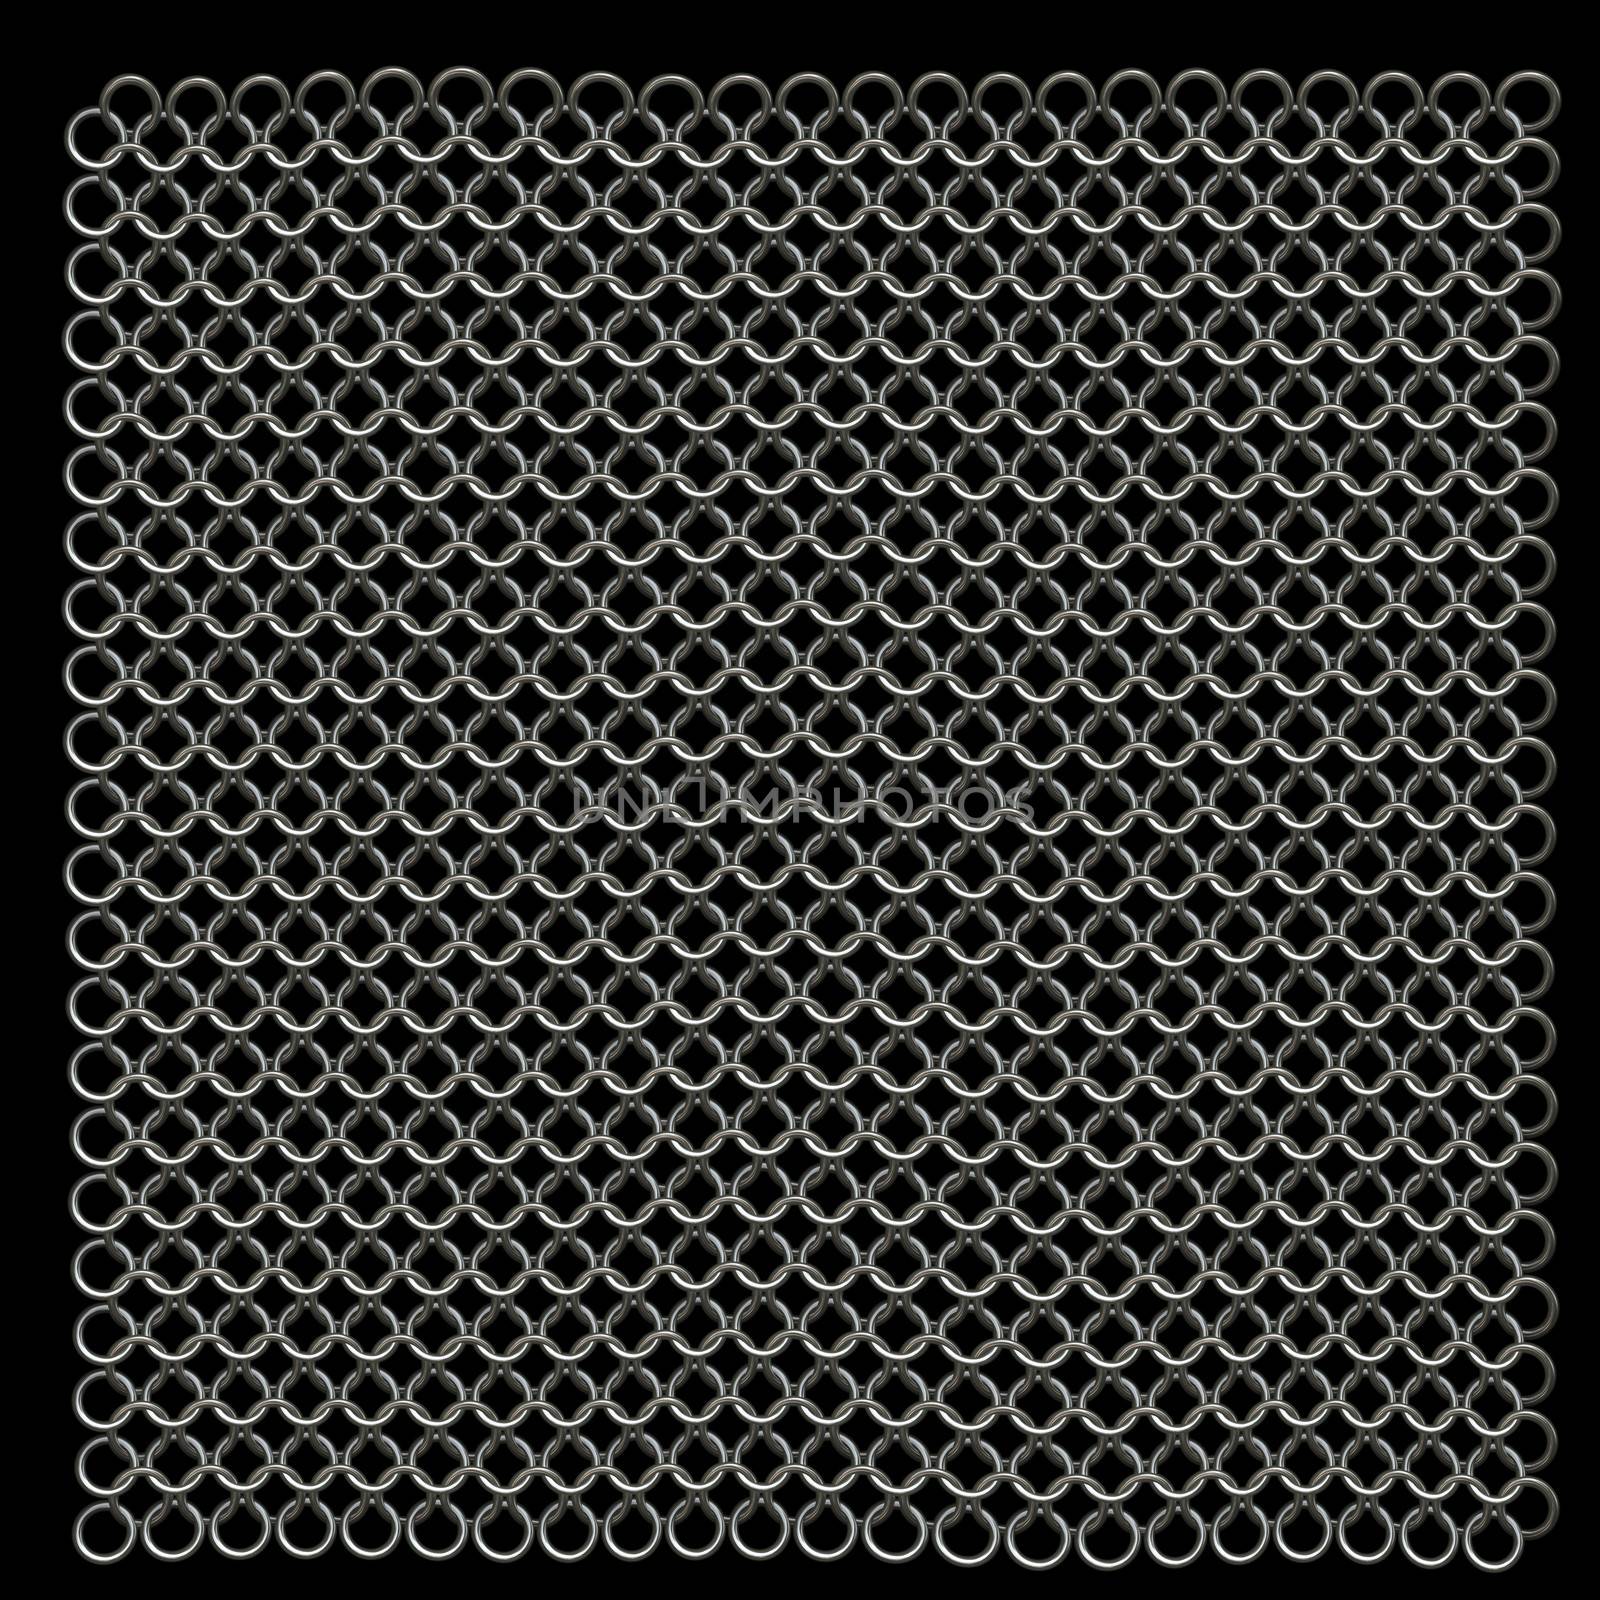 Computer generated metal chain mail texture